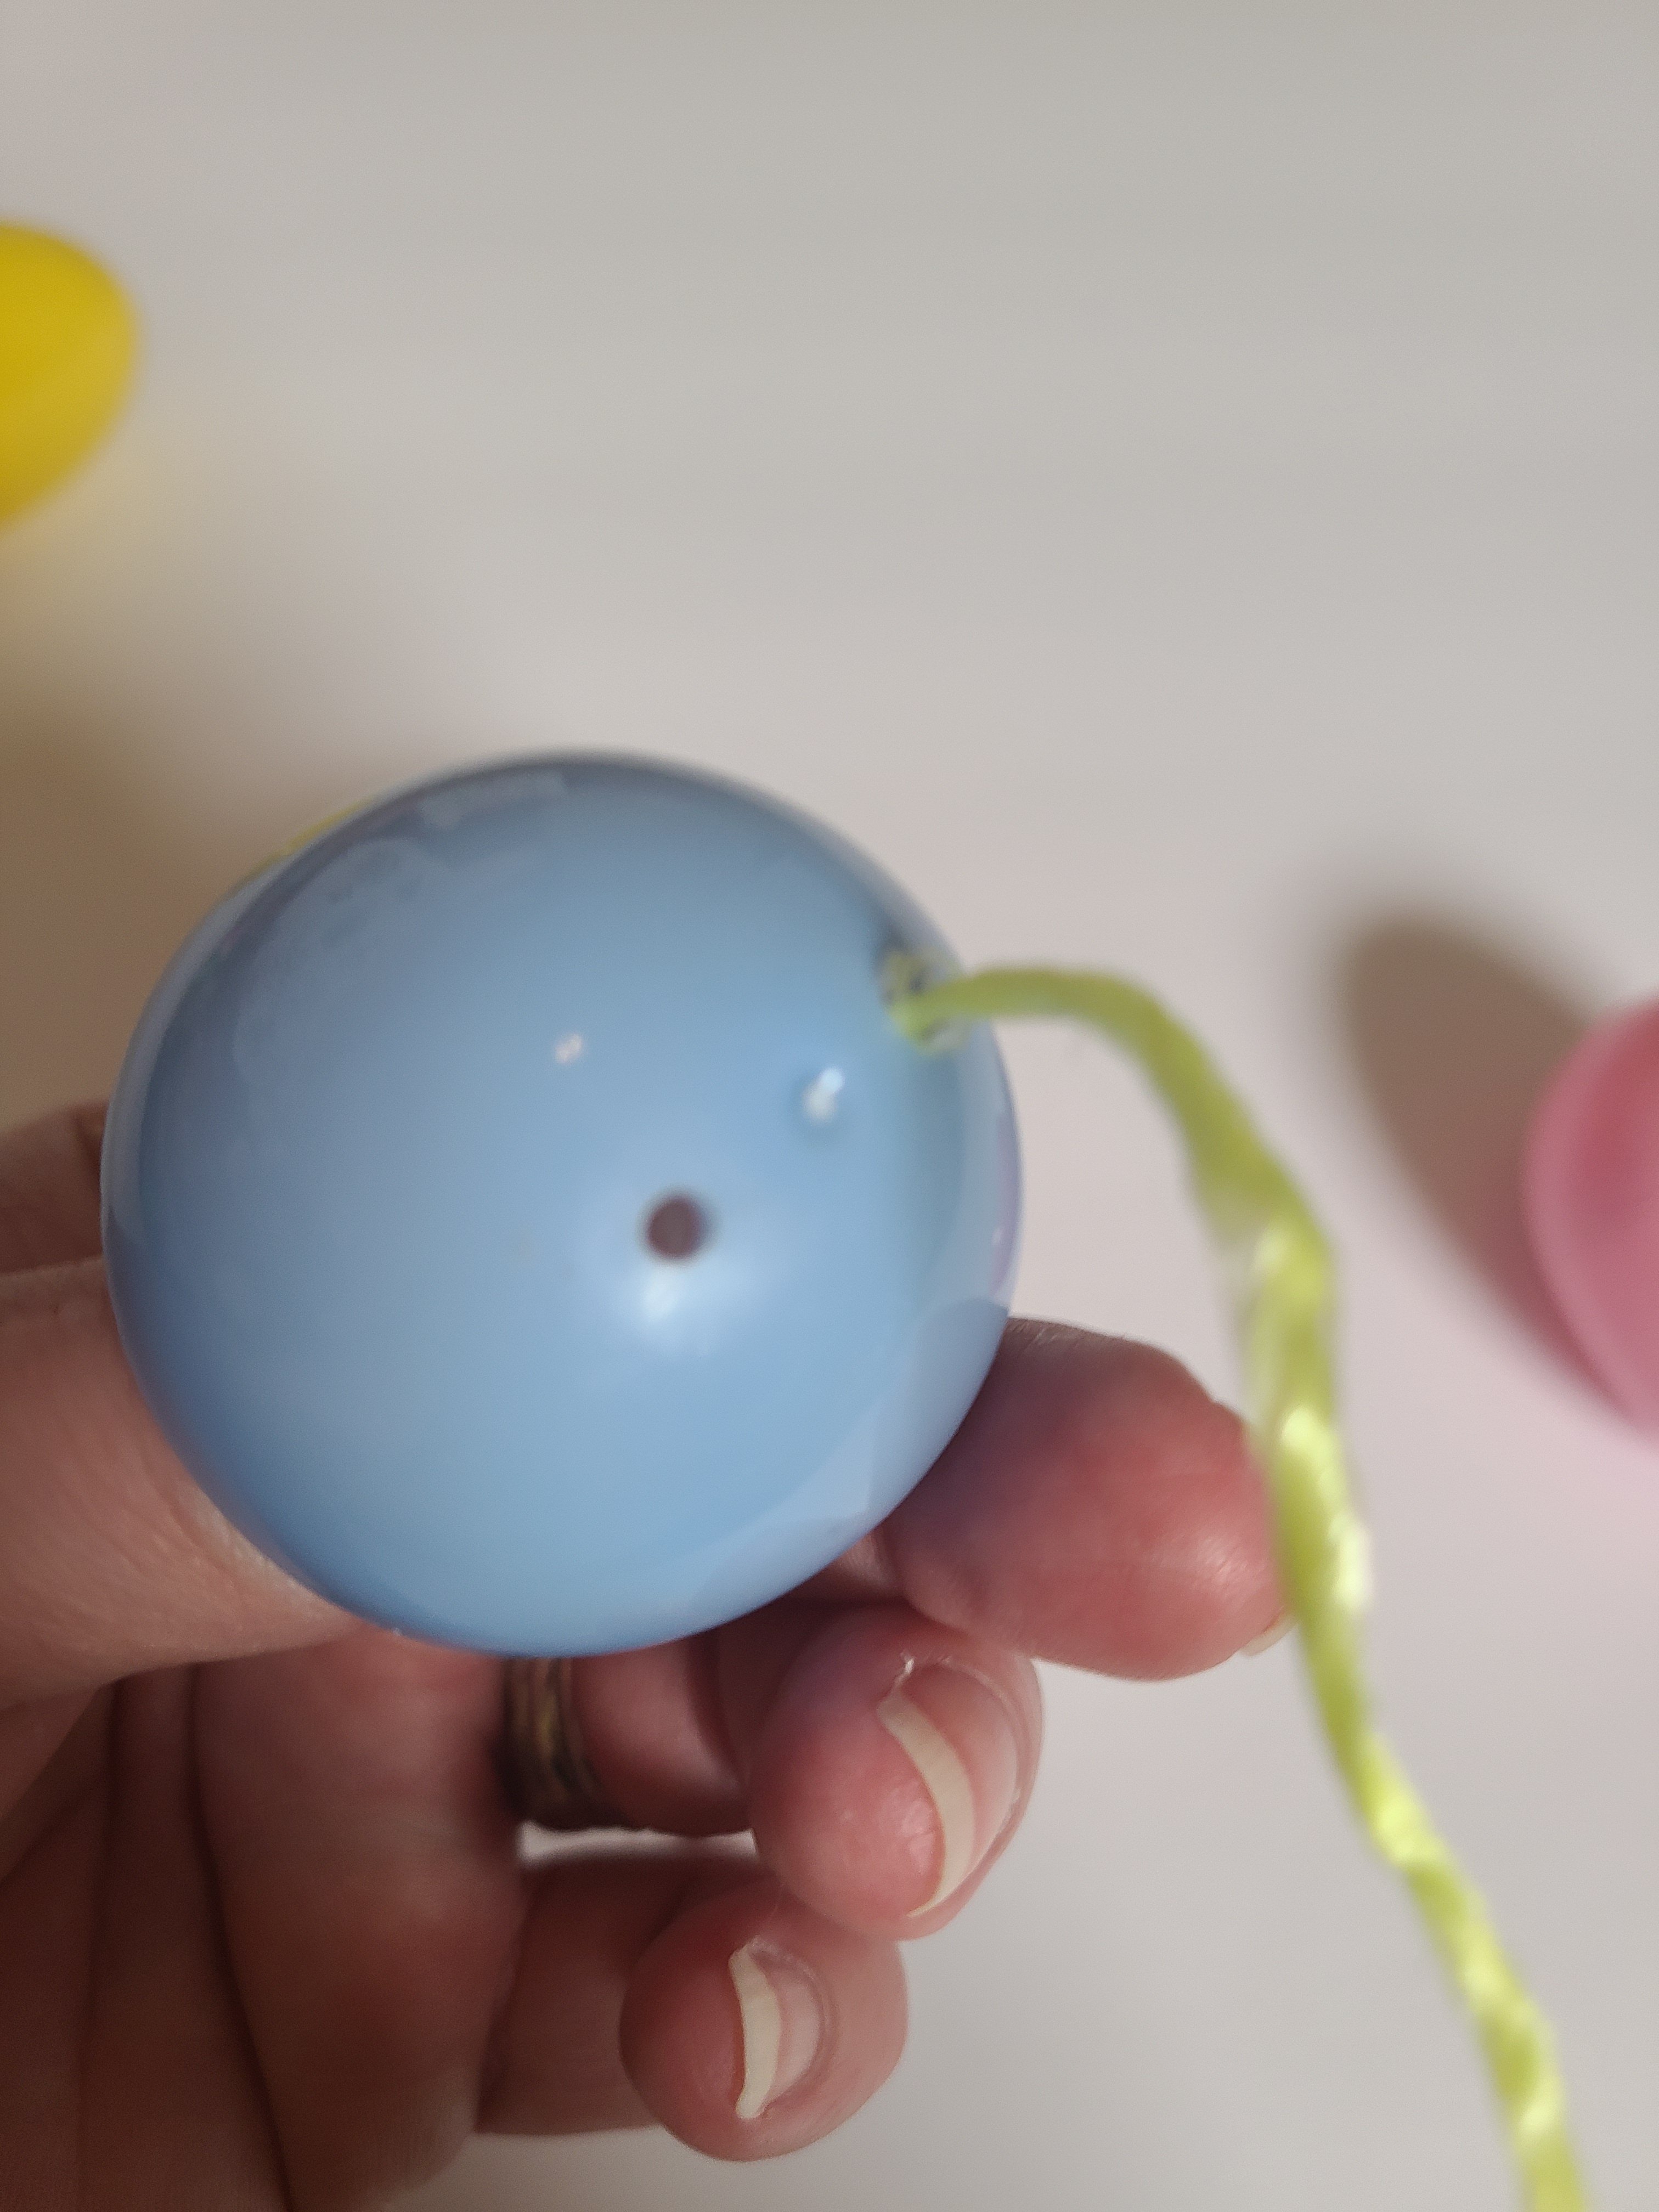 Showing the bottom of a plastic Easter egg where there are two holes to string the twine through to make the garland.